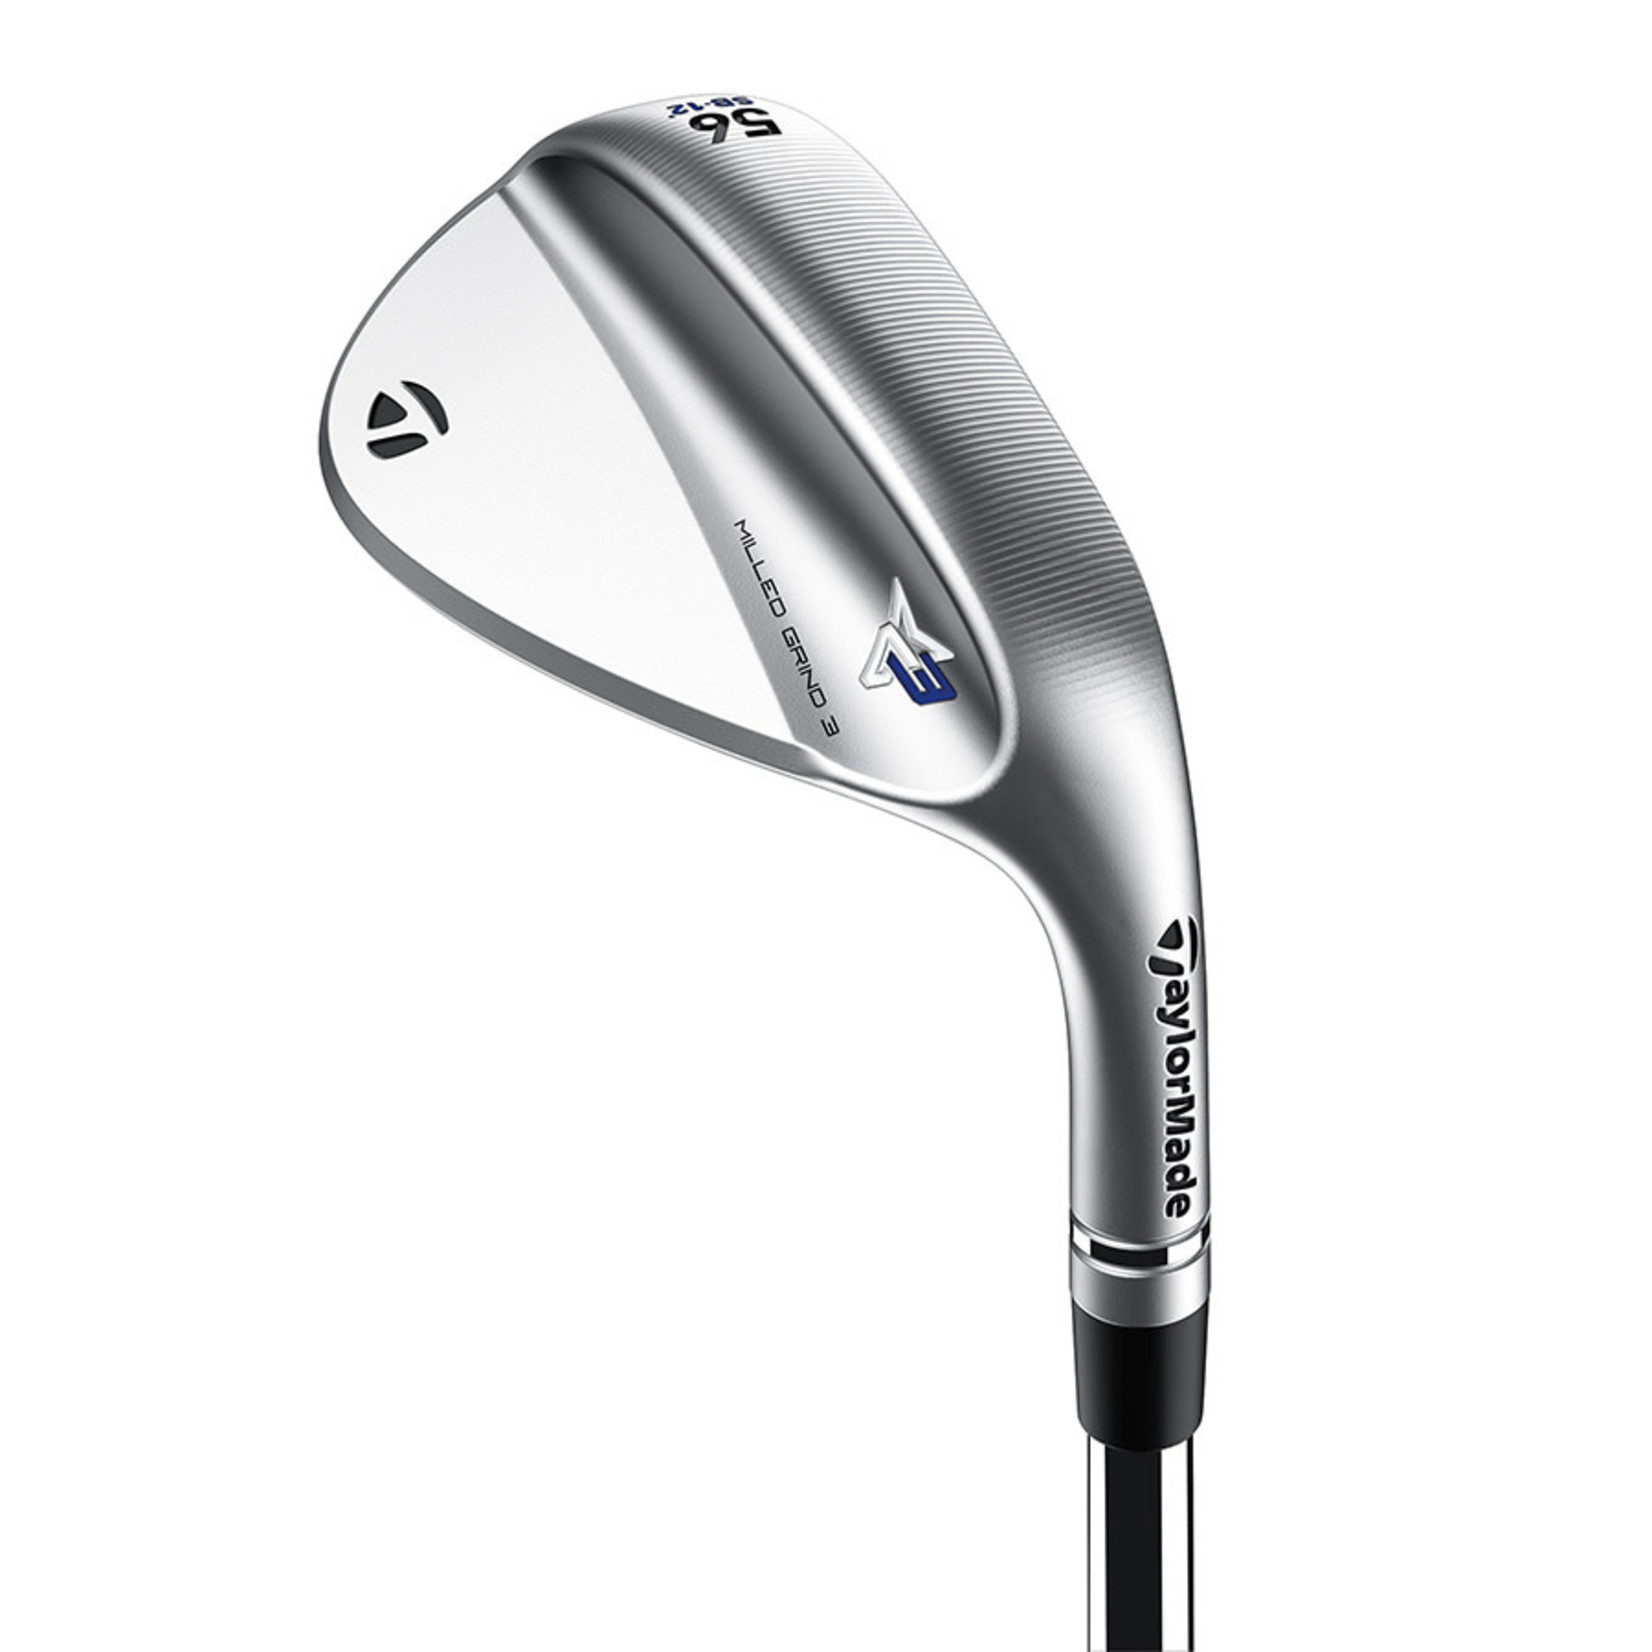 TAYLOR MADE Taylormade Mg3 Demo Wedge  Rh (AVAILABLE 52 OR 56 CHROME OR BLACK)